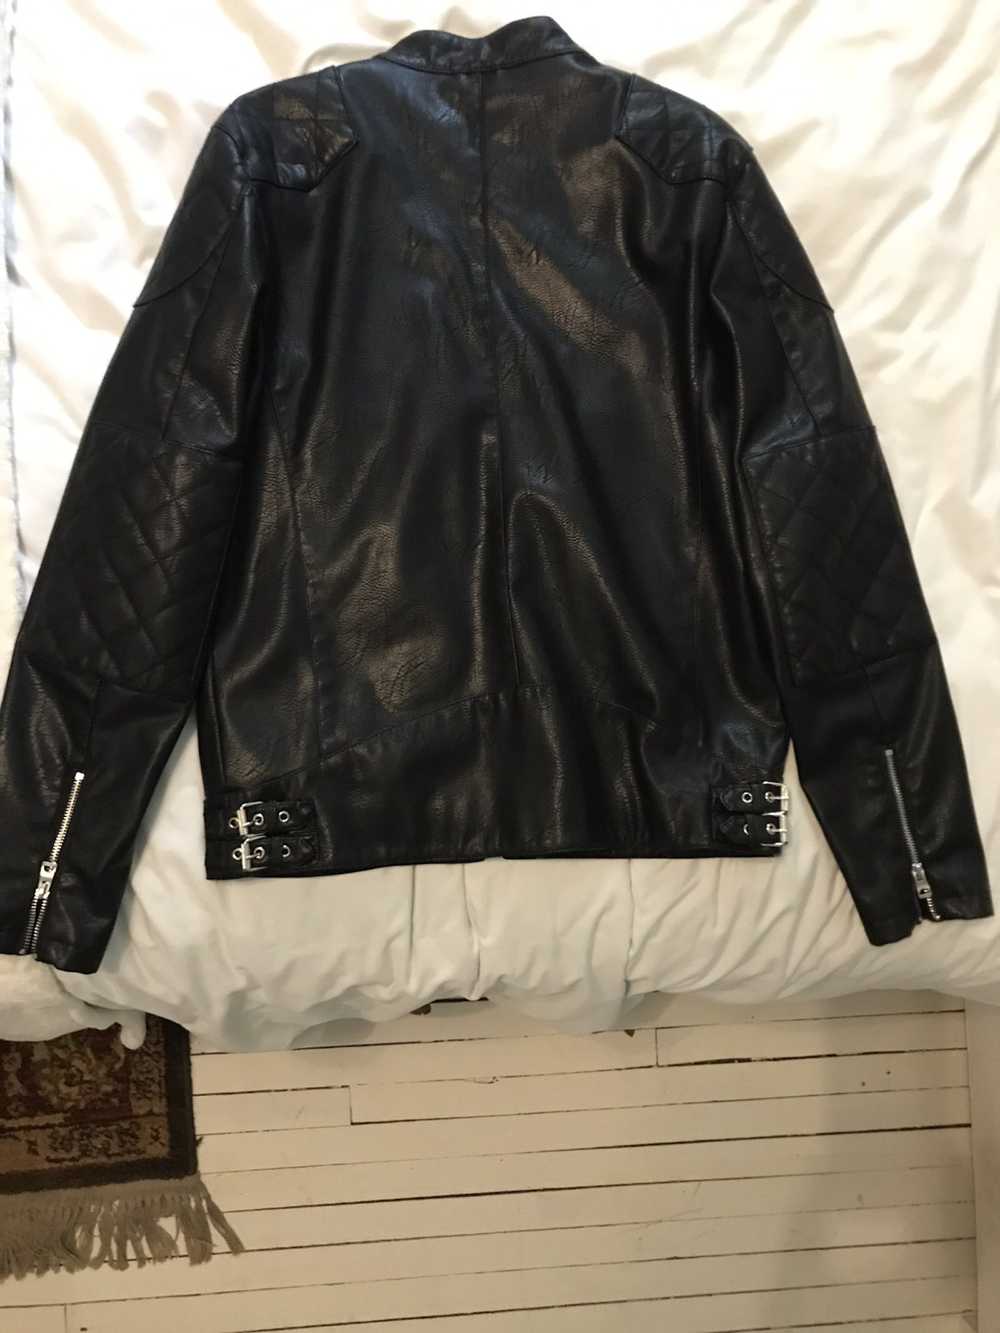 Guess Guess Leather Jacket Black - image 5